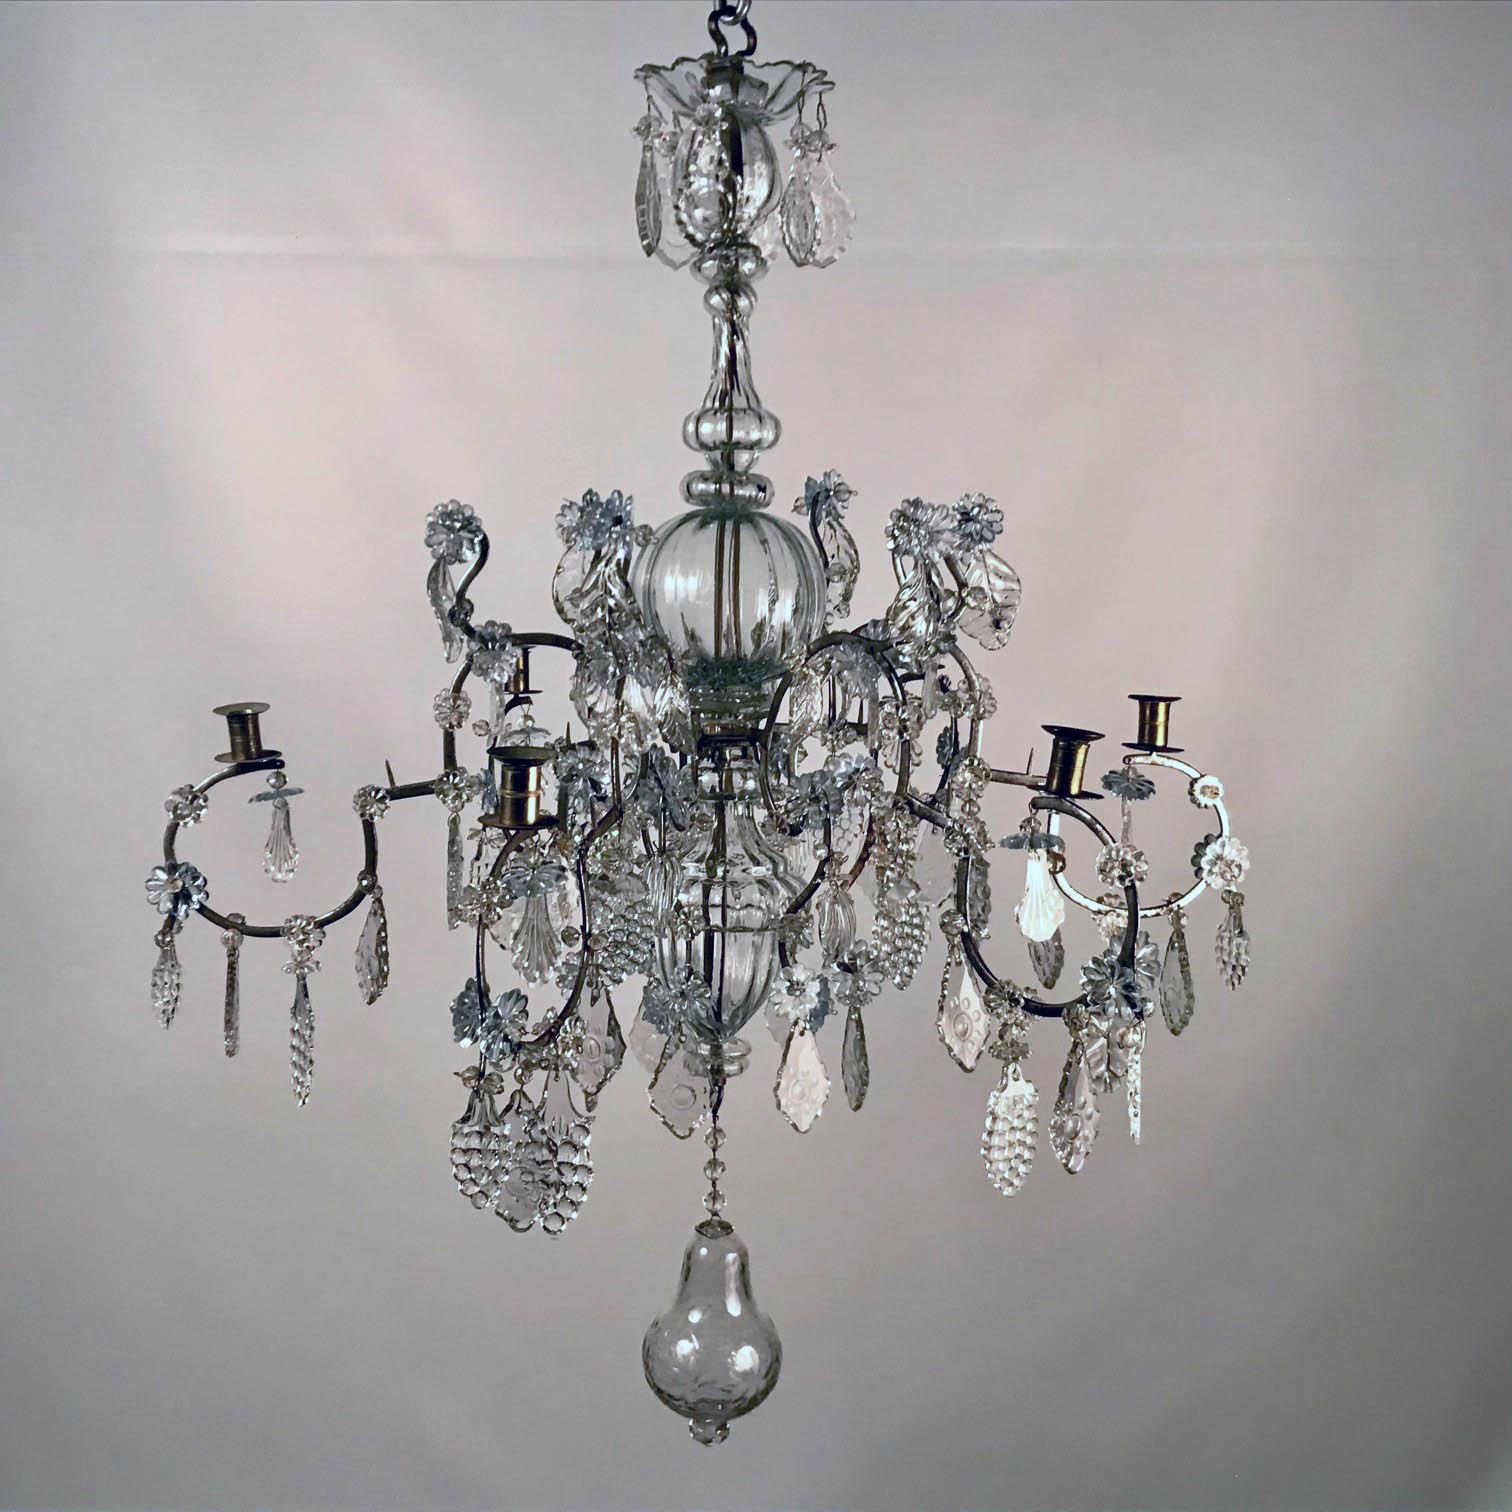 Baltic 18th century crystal and six-arm candle chandelier with antique crystal pendaloques in form of grape clusters, flowers and leaves, hanging from arms leading from central body glass covered stem and finishing with a large pear shaped blown and